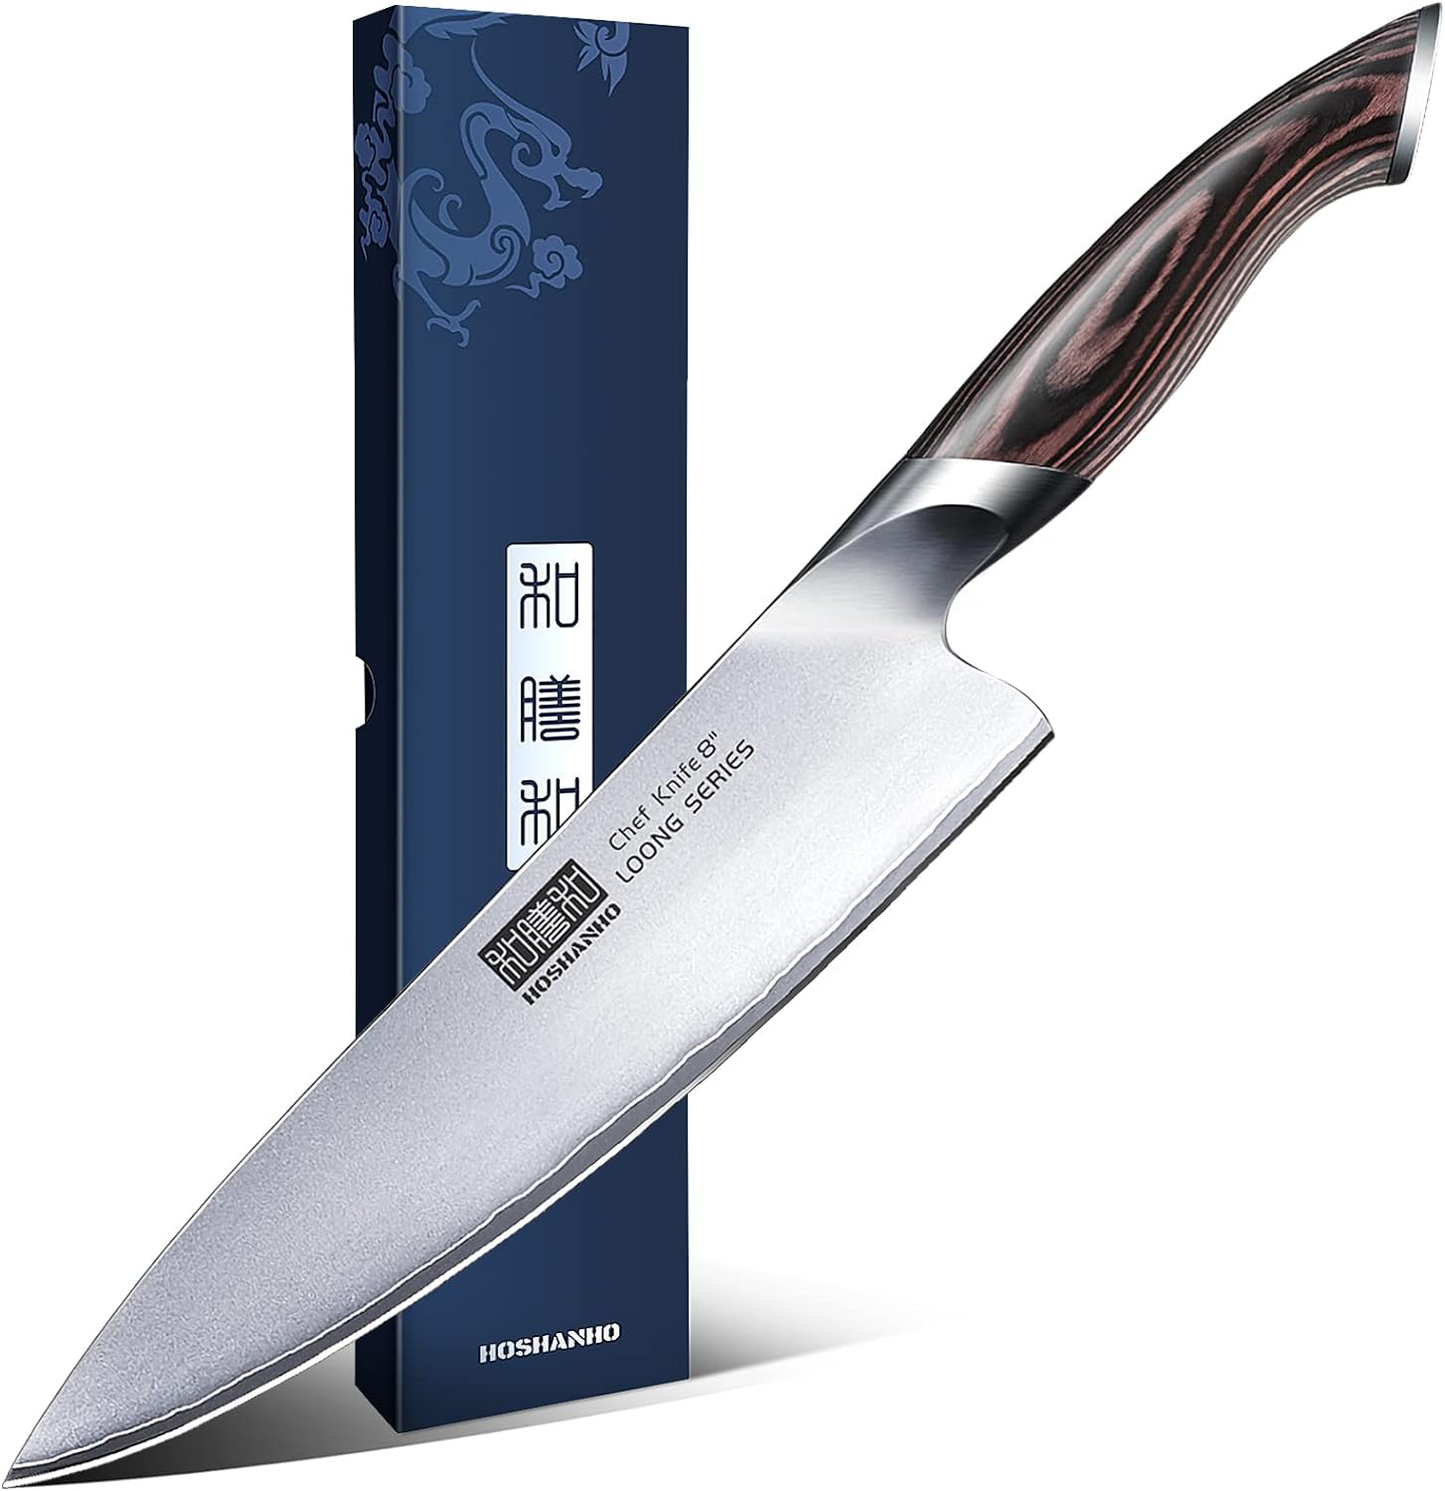 KD 8-Inch AUS-10 Japanese Steel Chef's Knife  with Ergonomic Handle